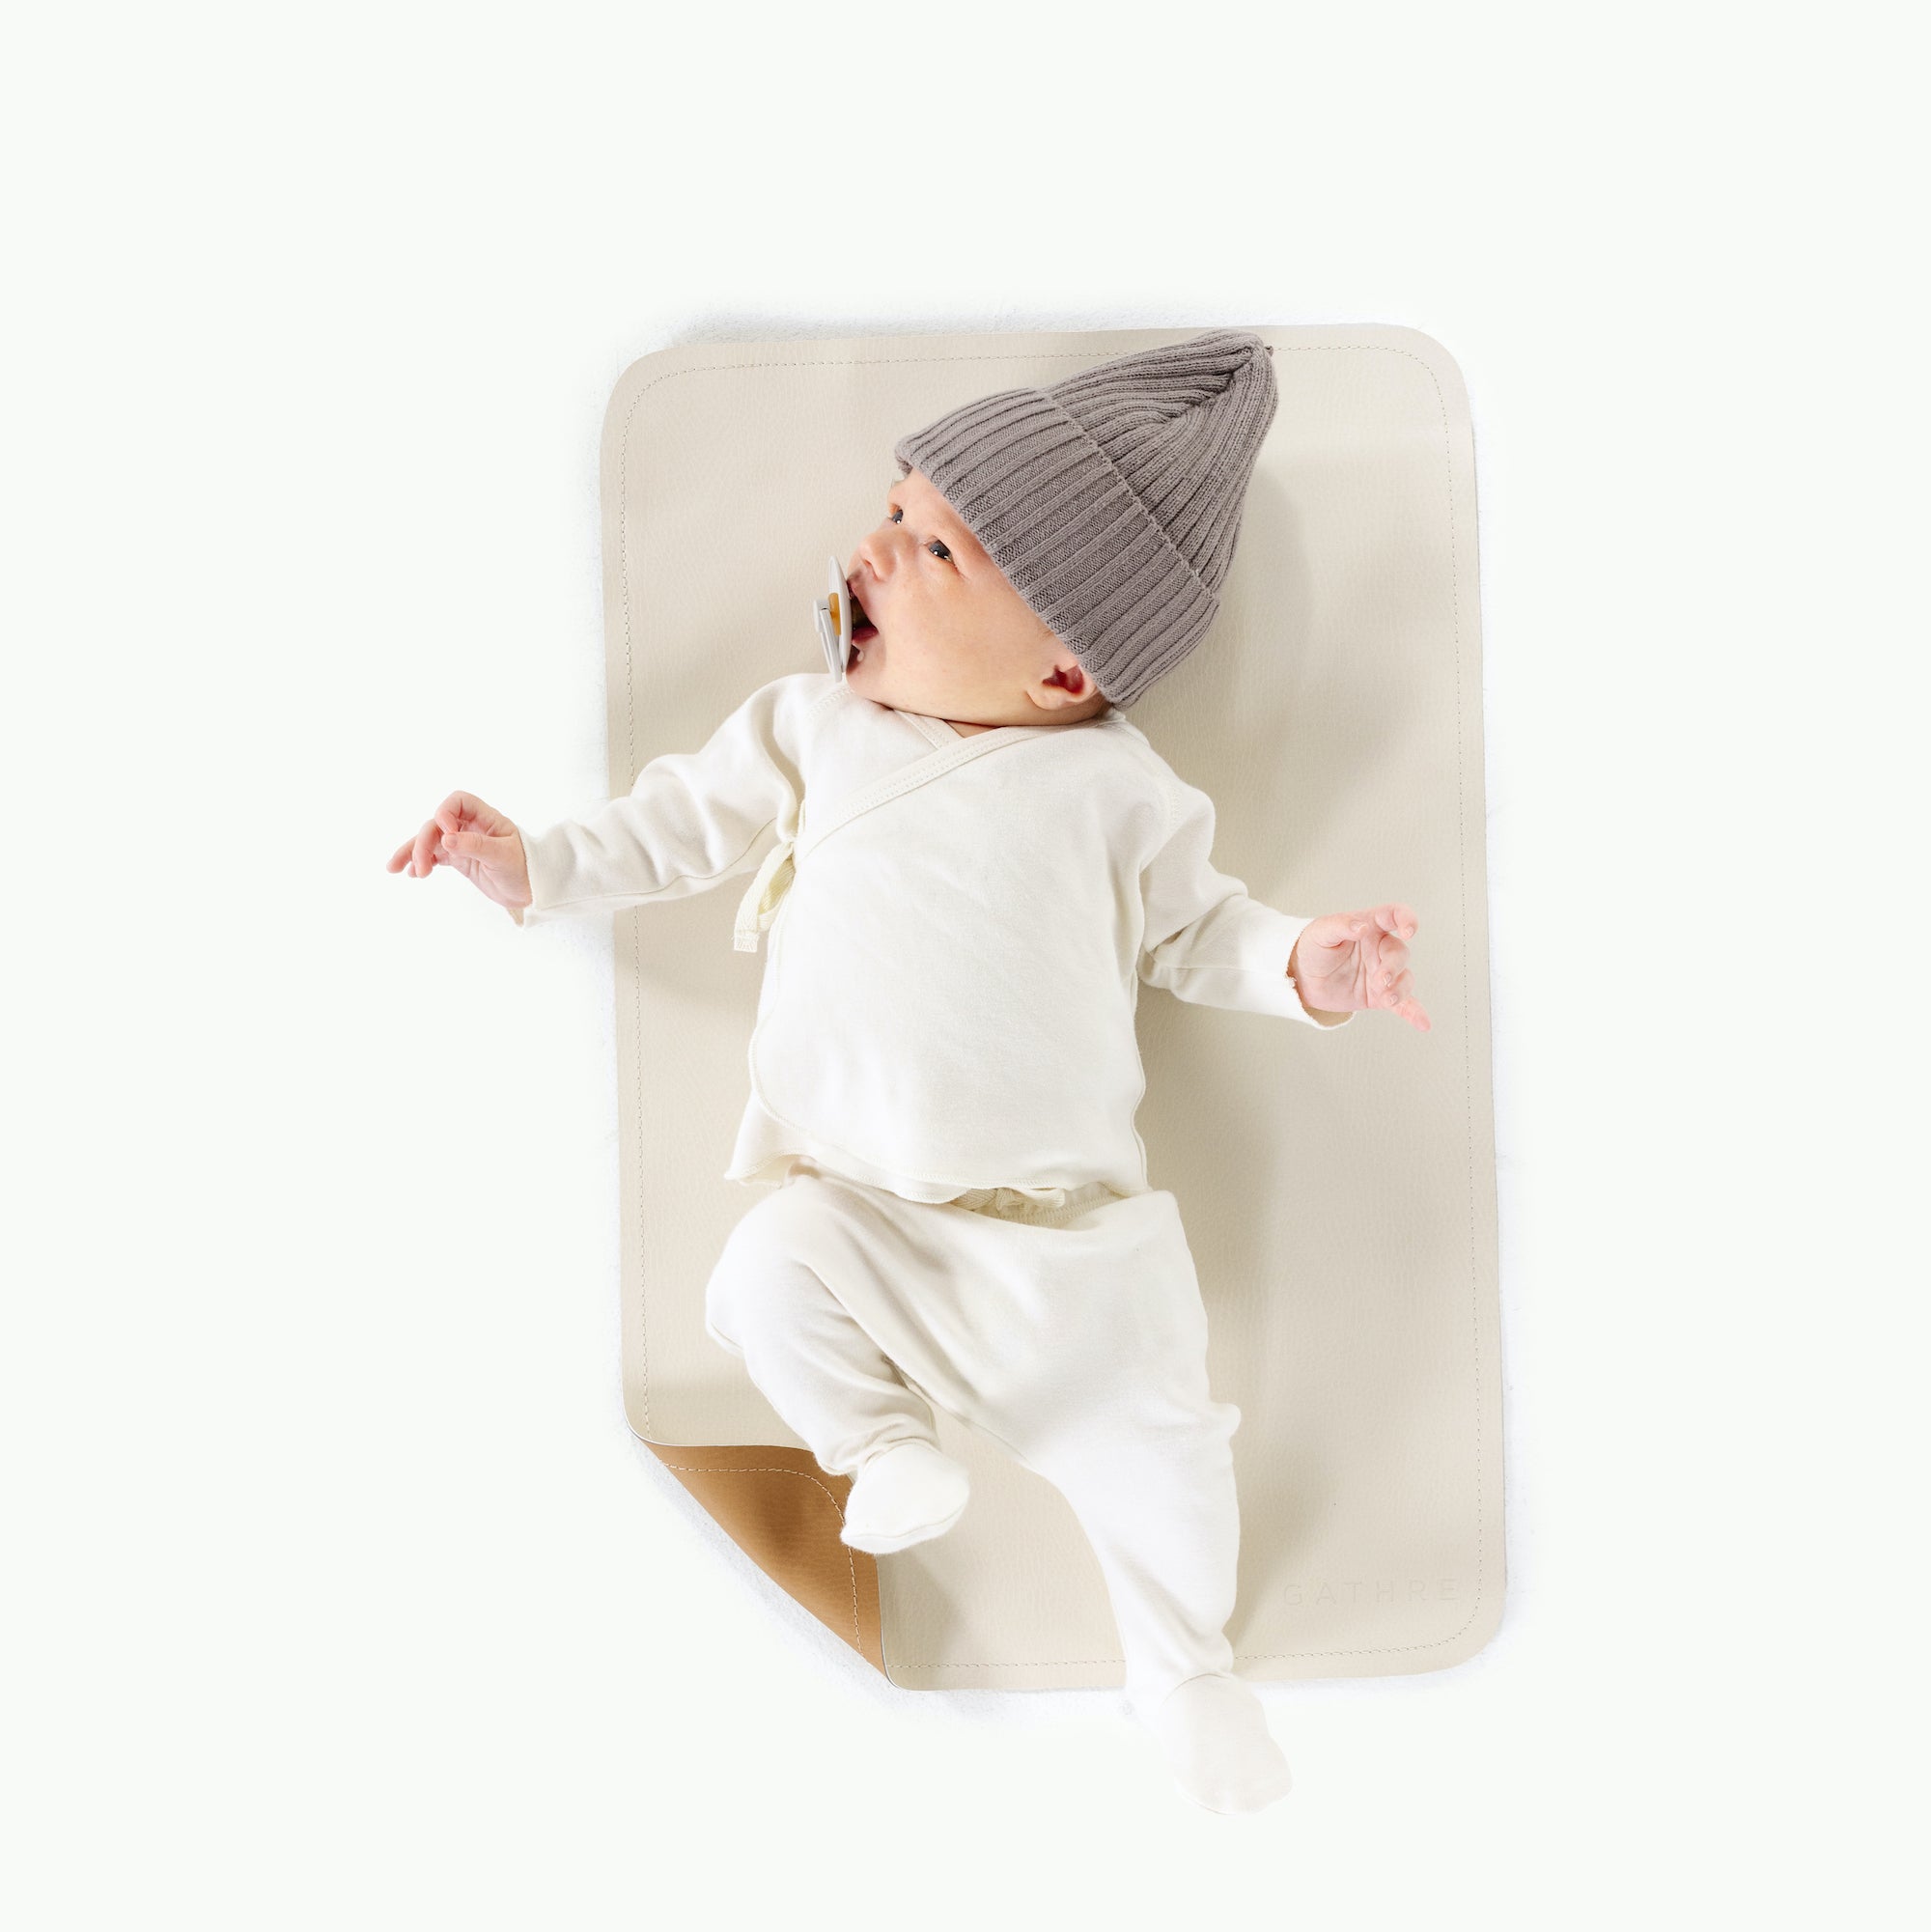 Camel • Ivory@overhead of baby on mat